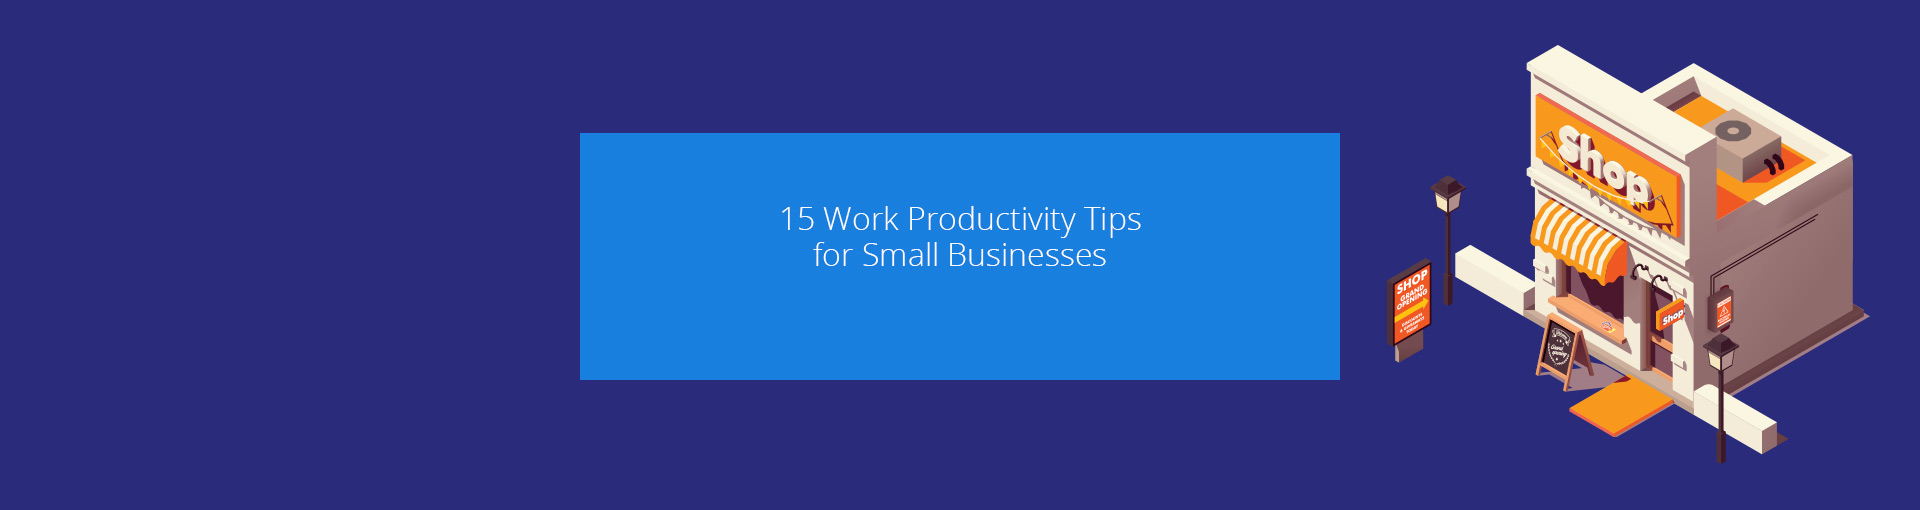 15 Work Productivity Tips for Small Businesses Featured Image